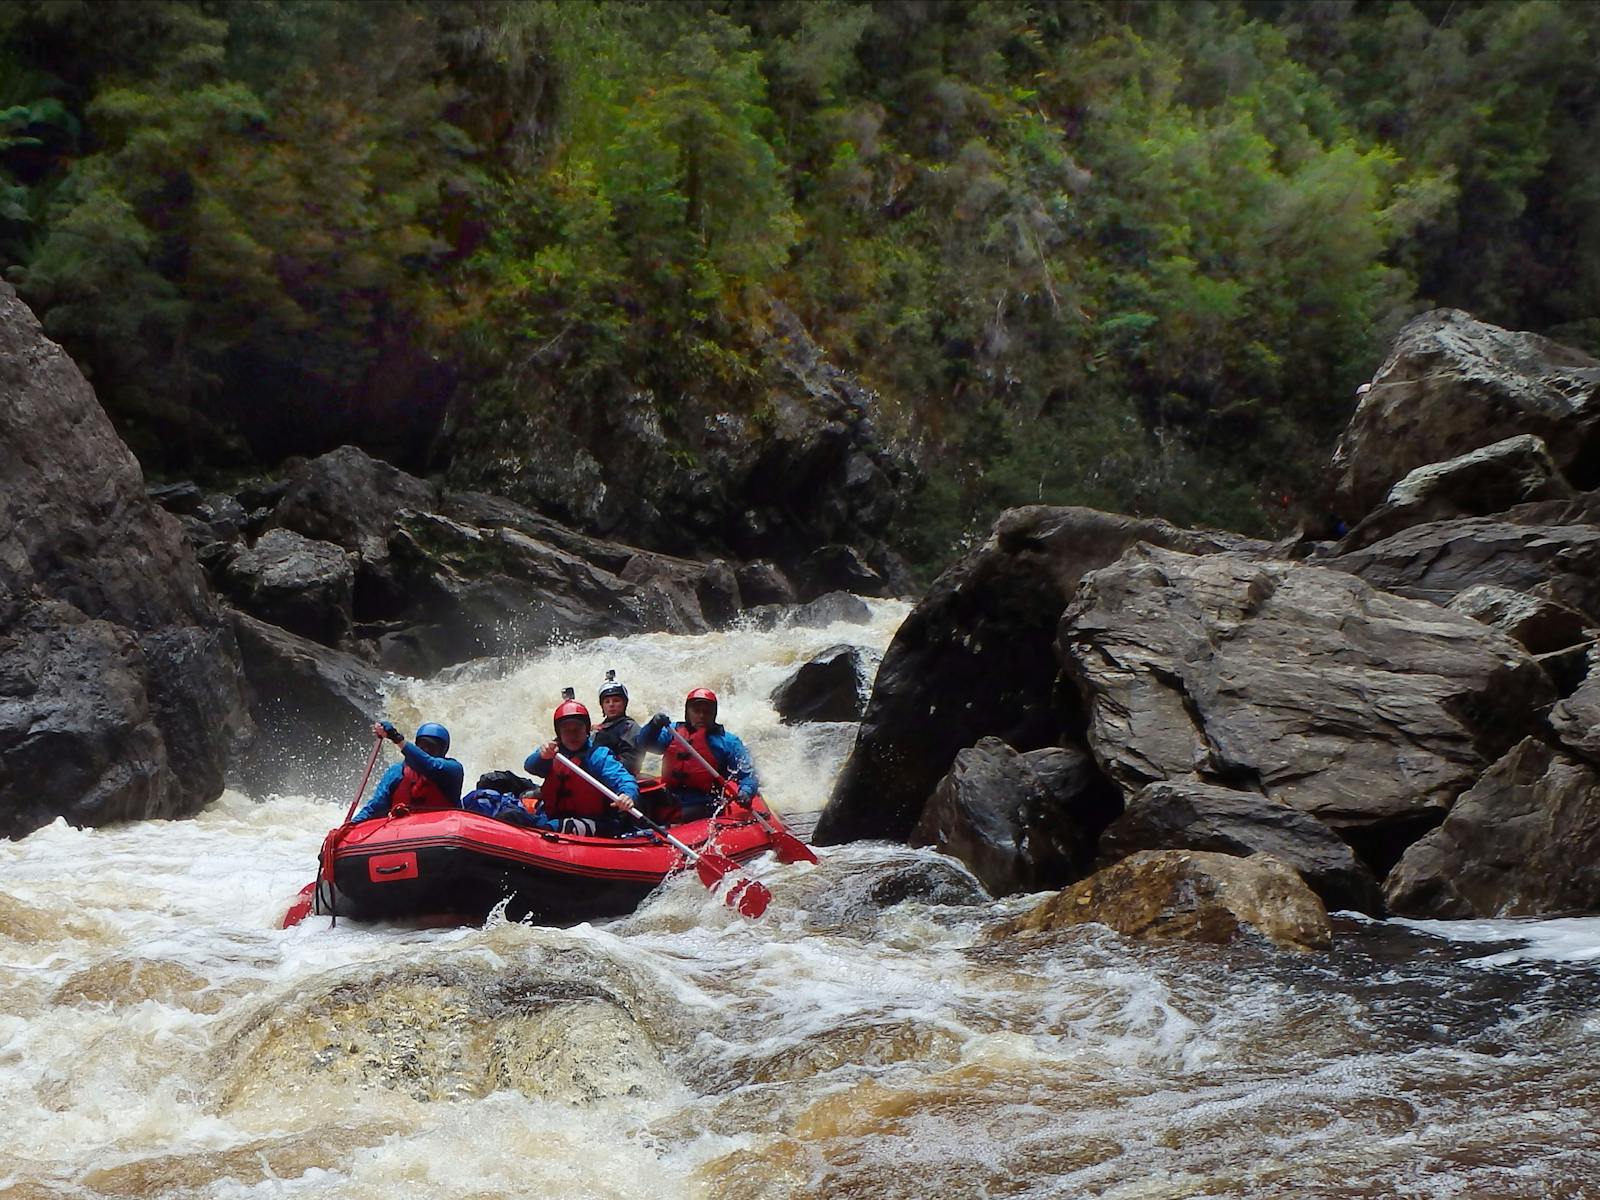 Whitewater rafting action in the Great Ravine on the Franklin River